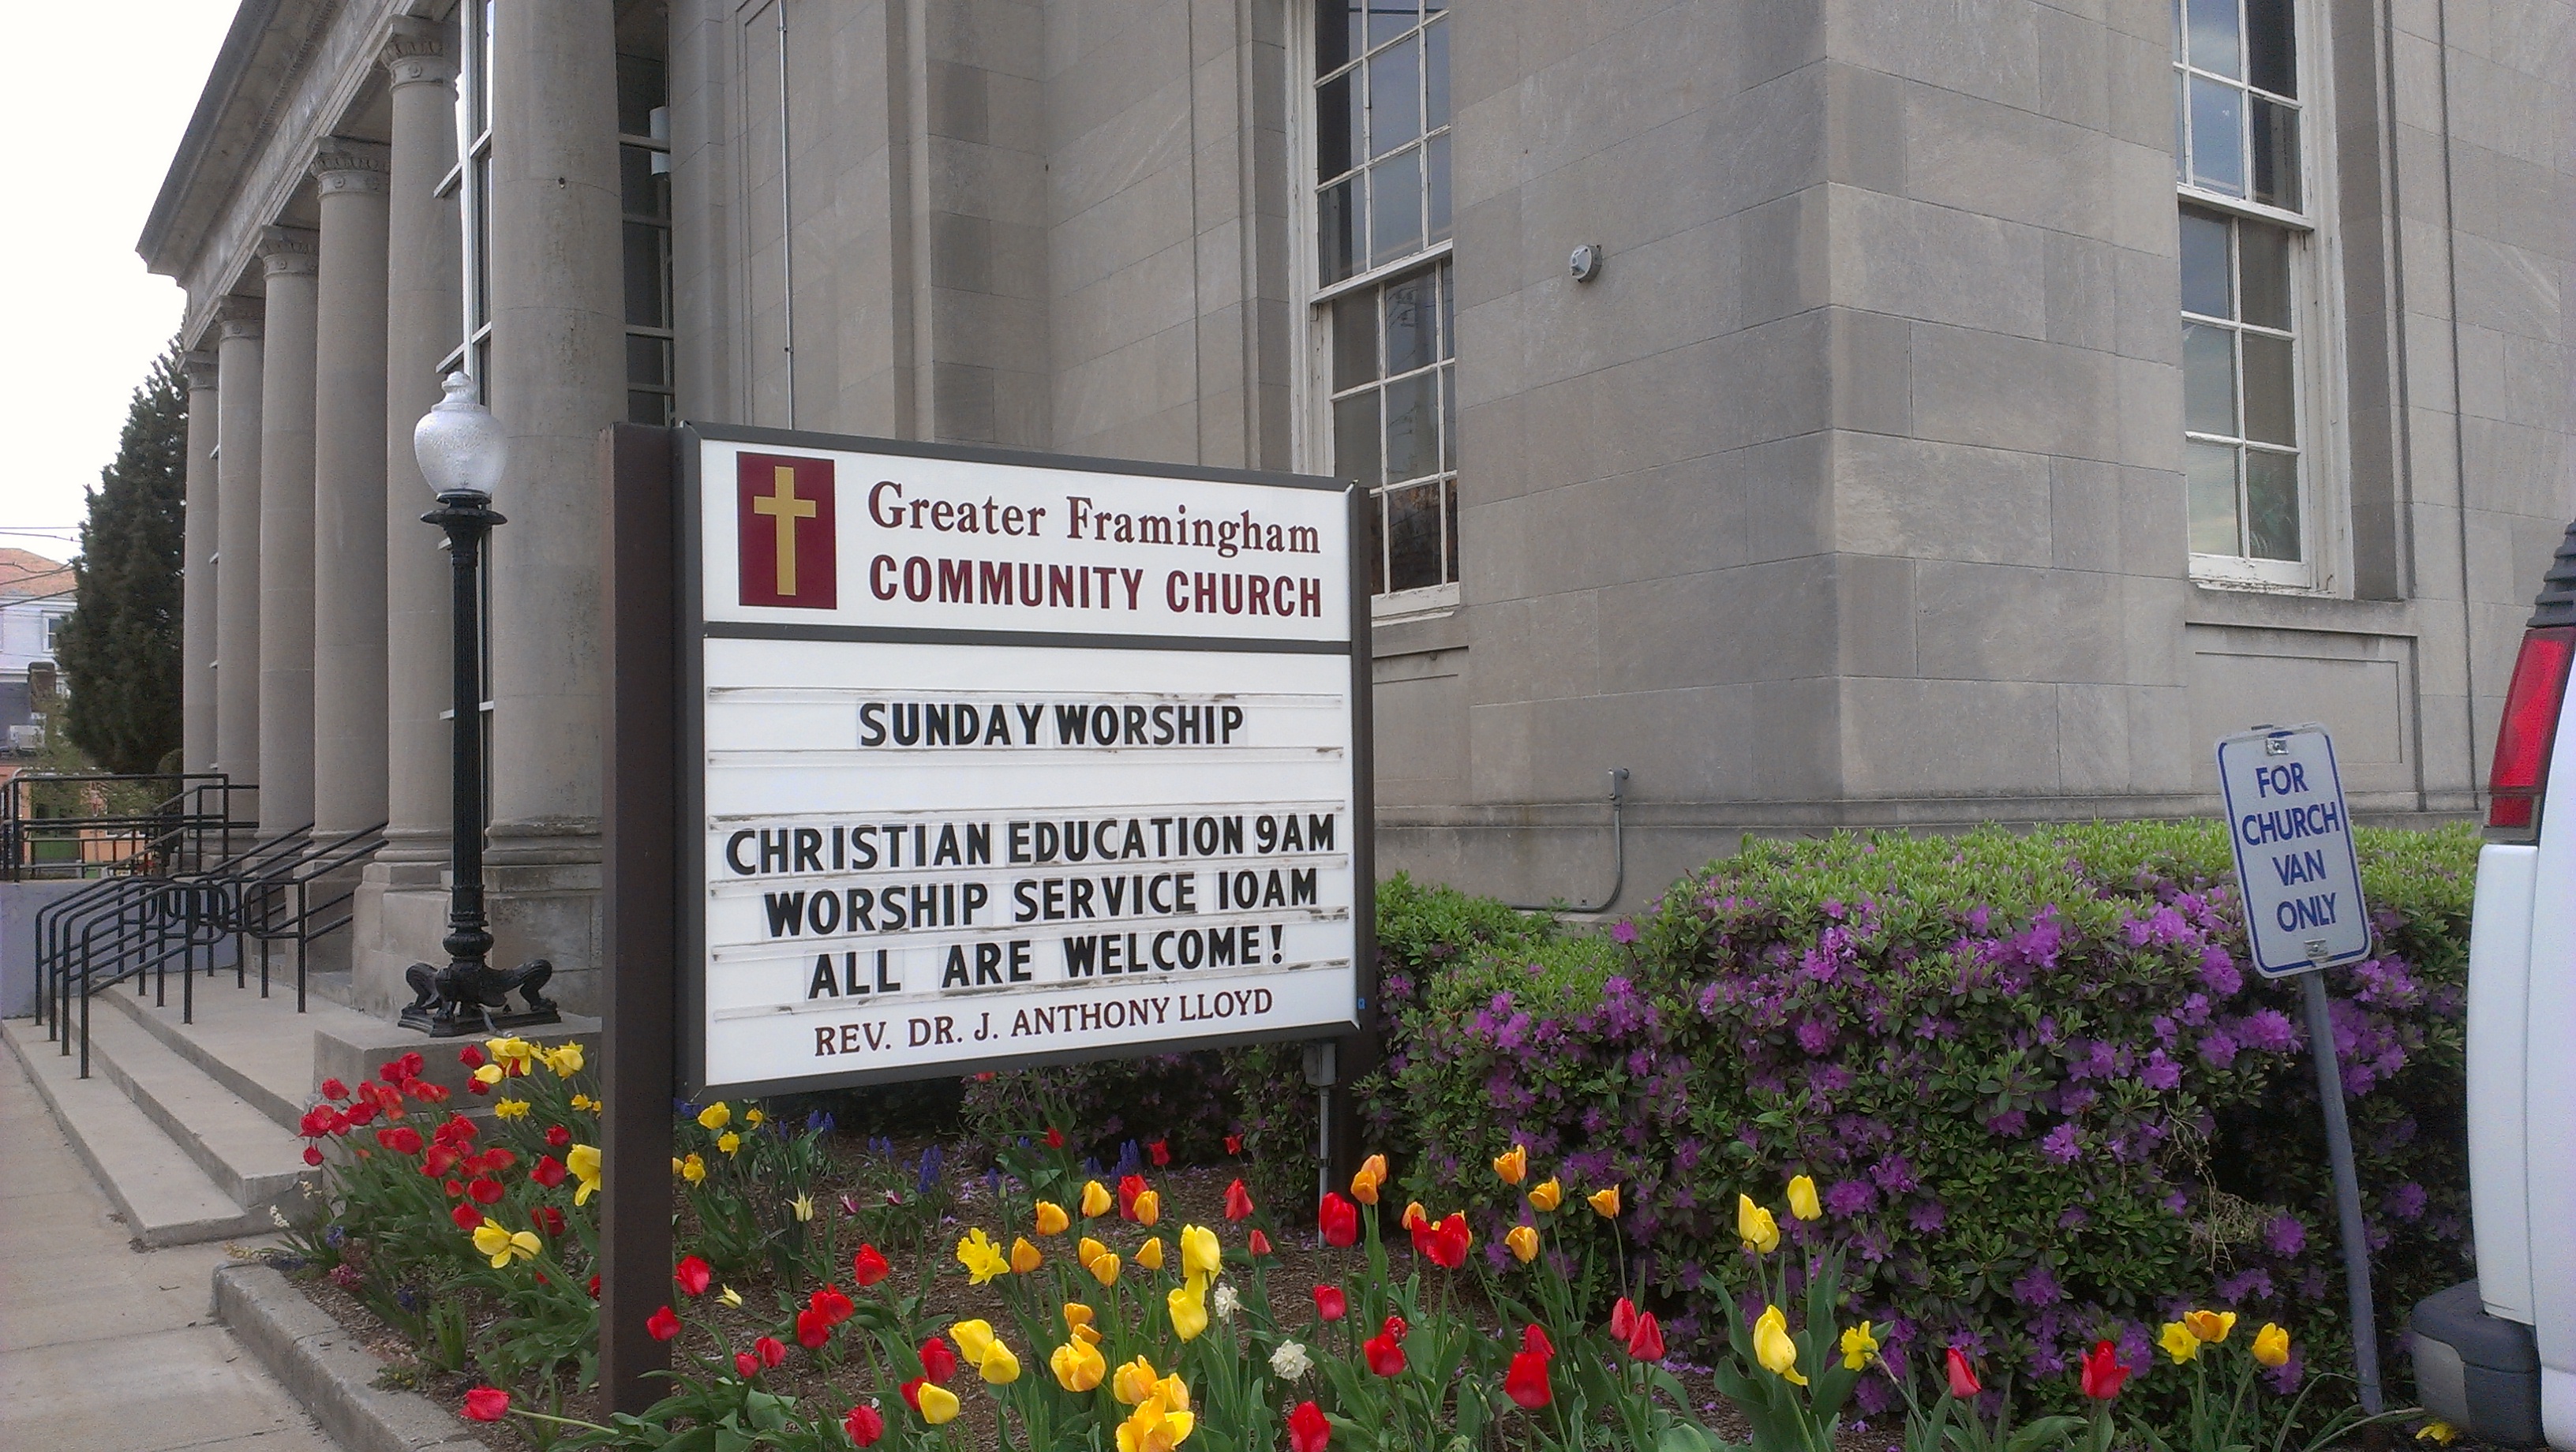 Church billboard outside the building: Welcome! Sunday service at 10am. Sunday School at 9am.